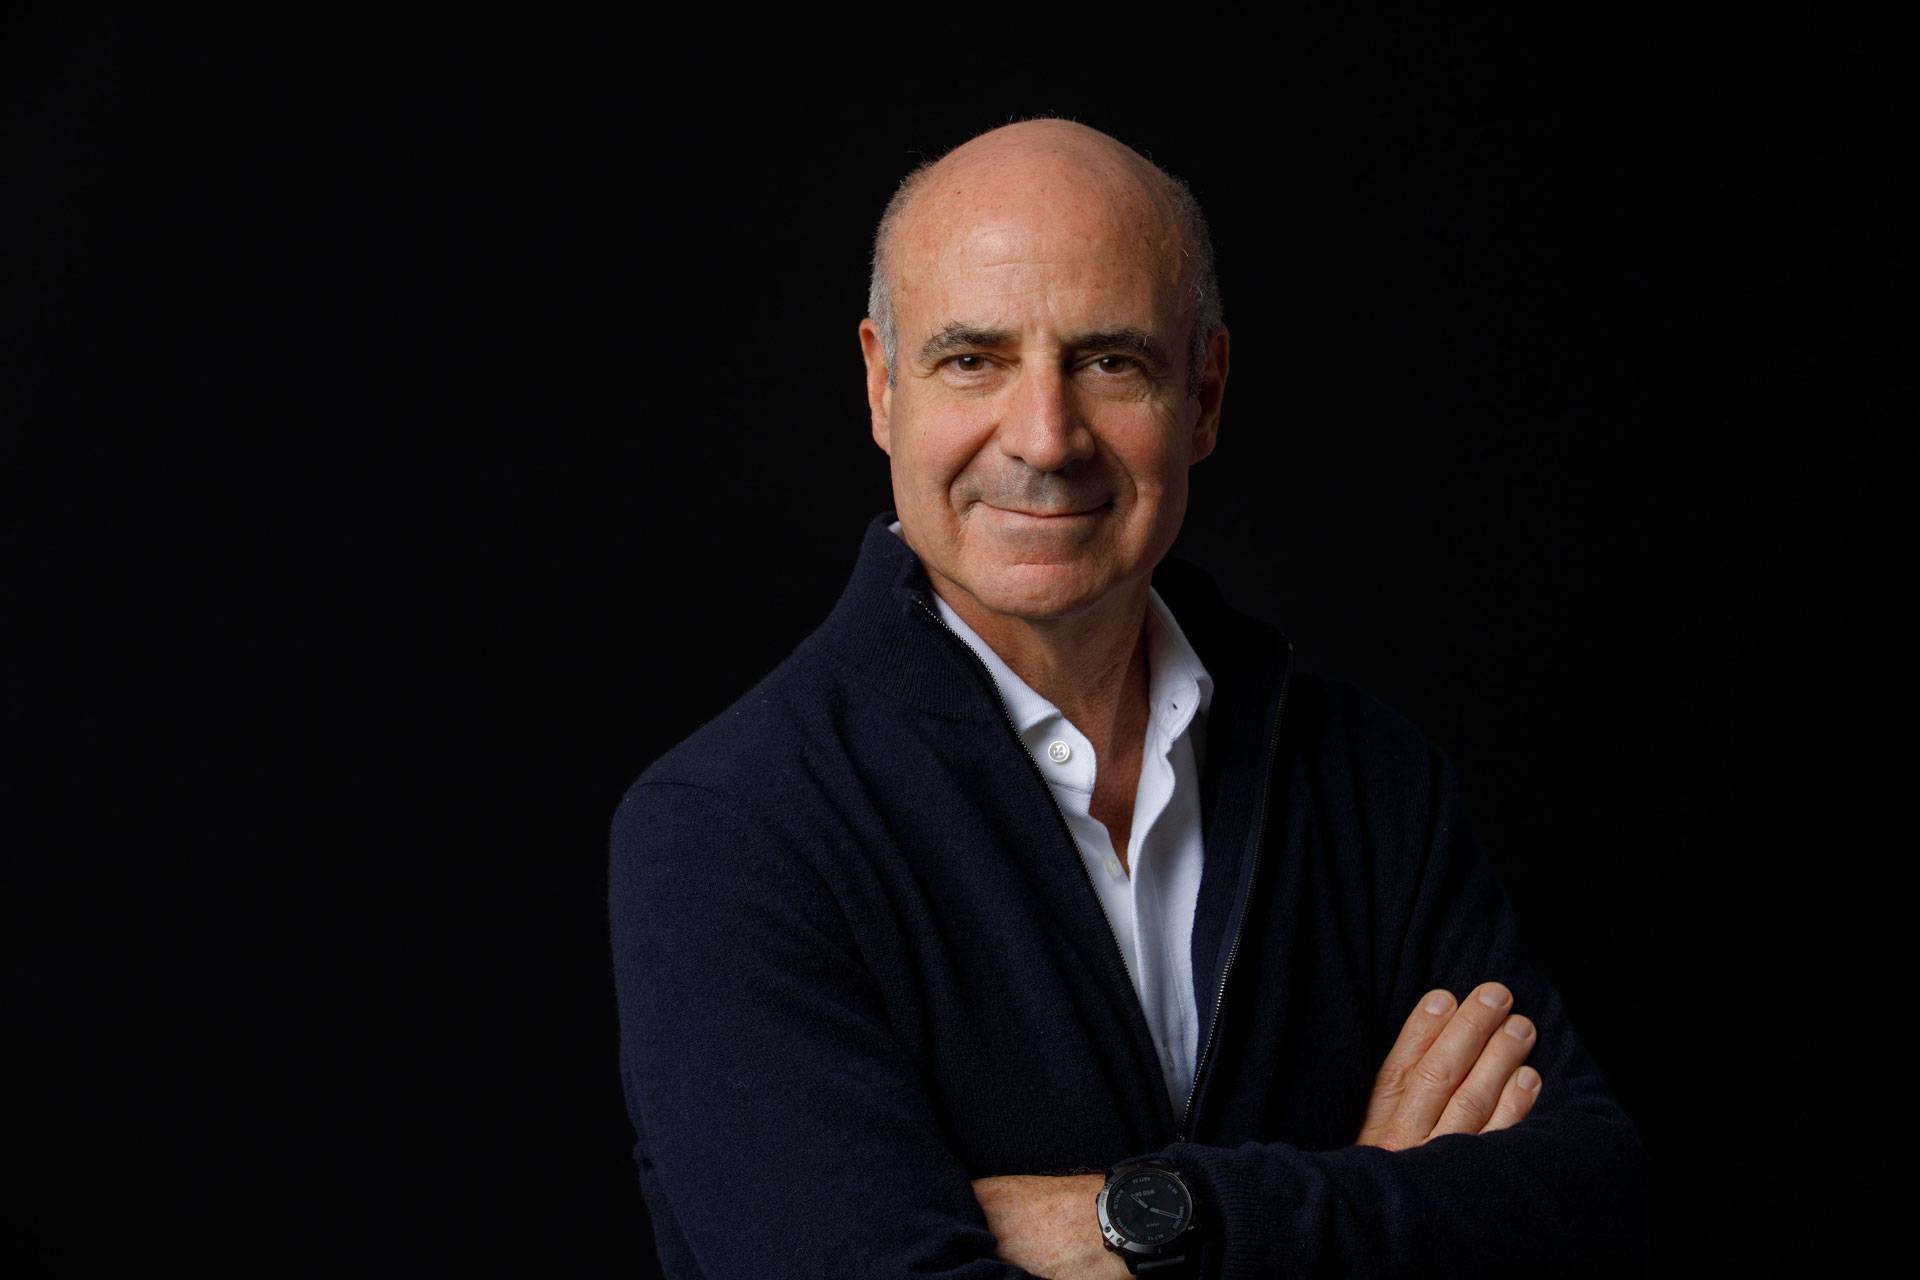 Portrait of Bill Browder, arms crossed, wearing a dark blazer and white shirt, with a black background